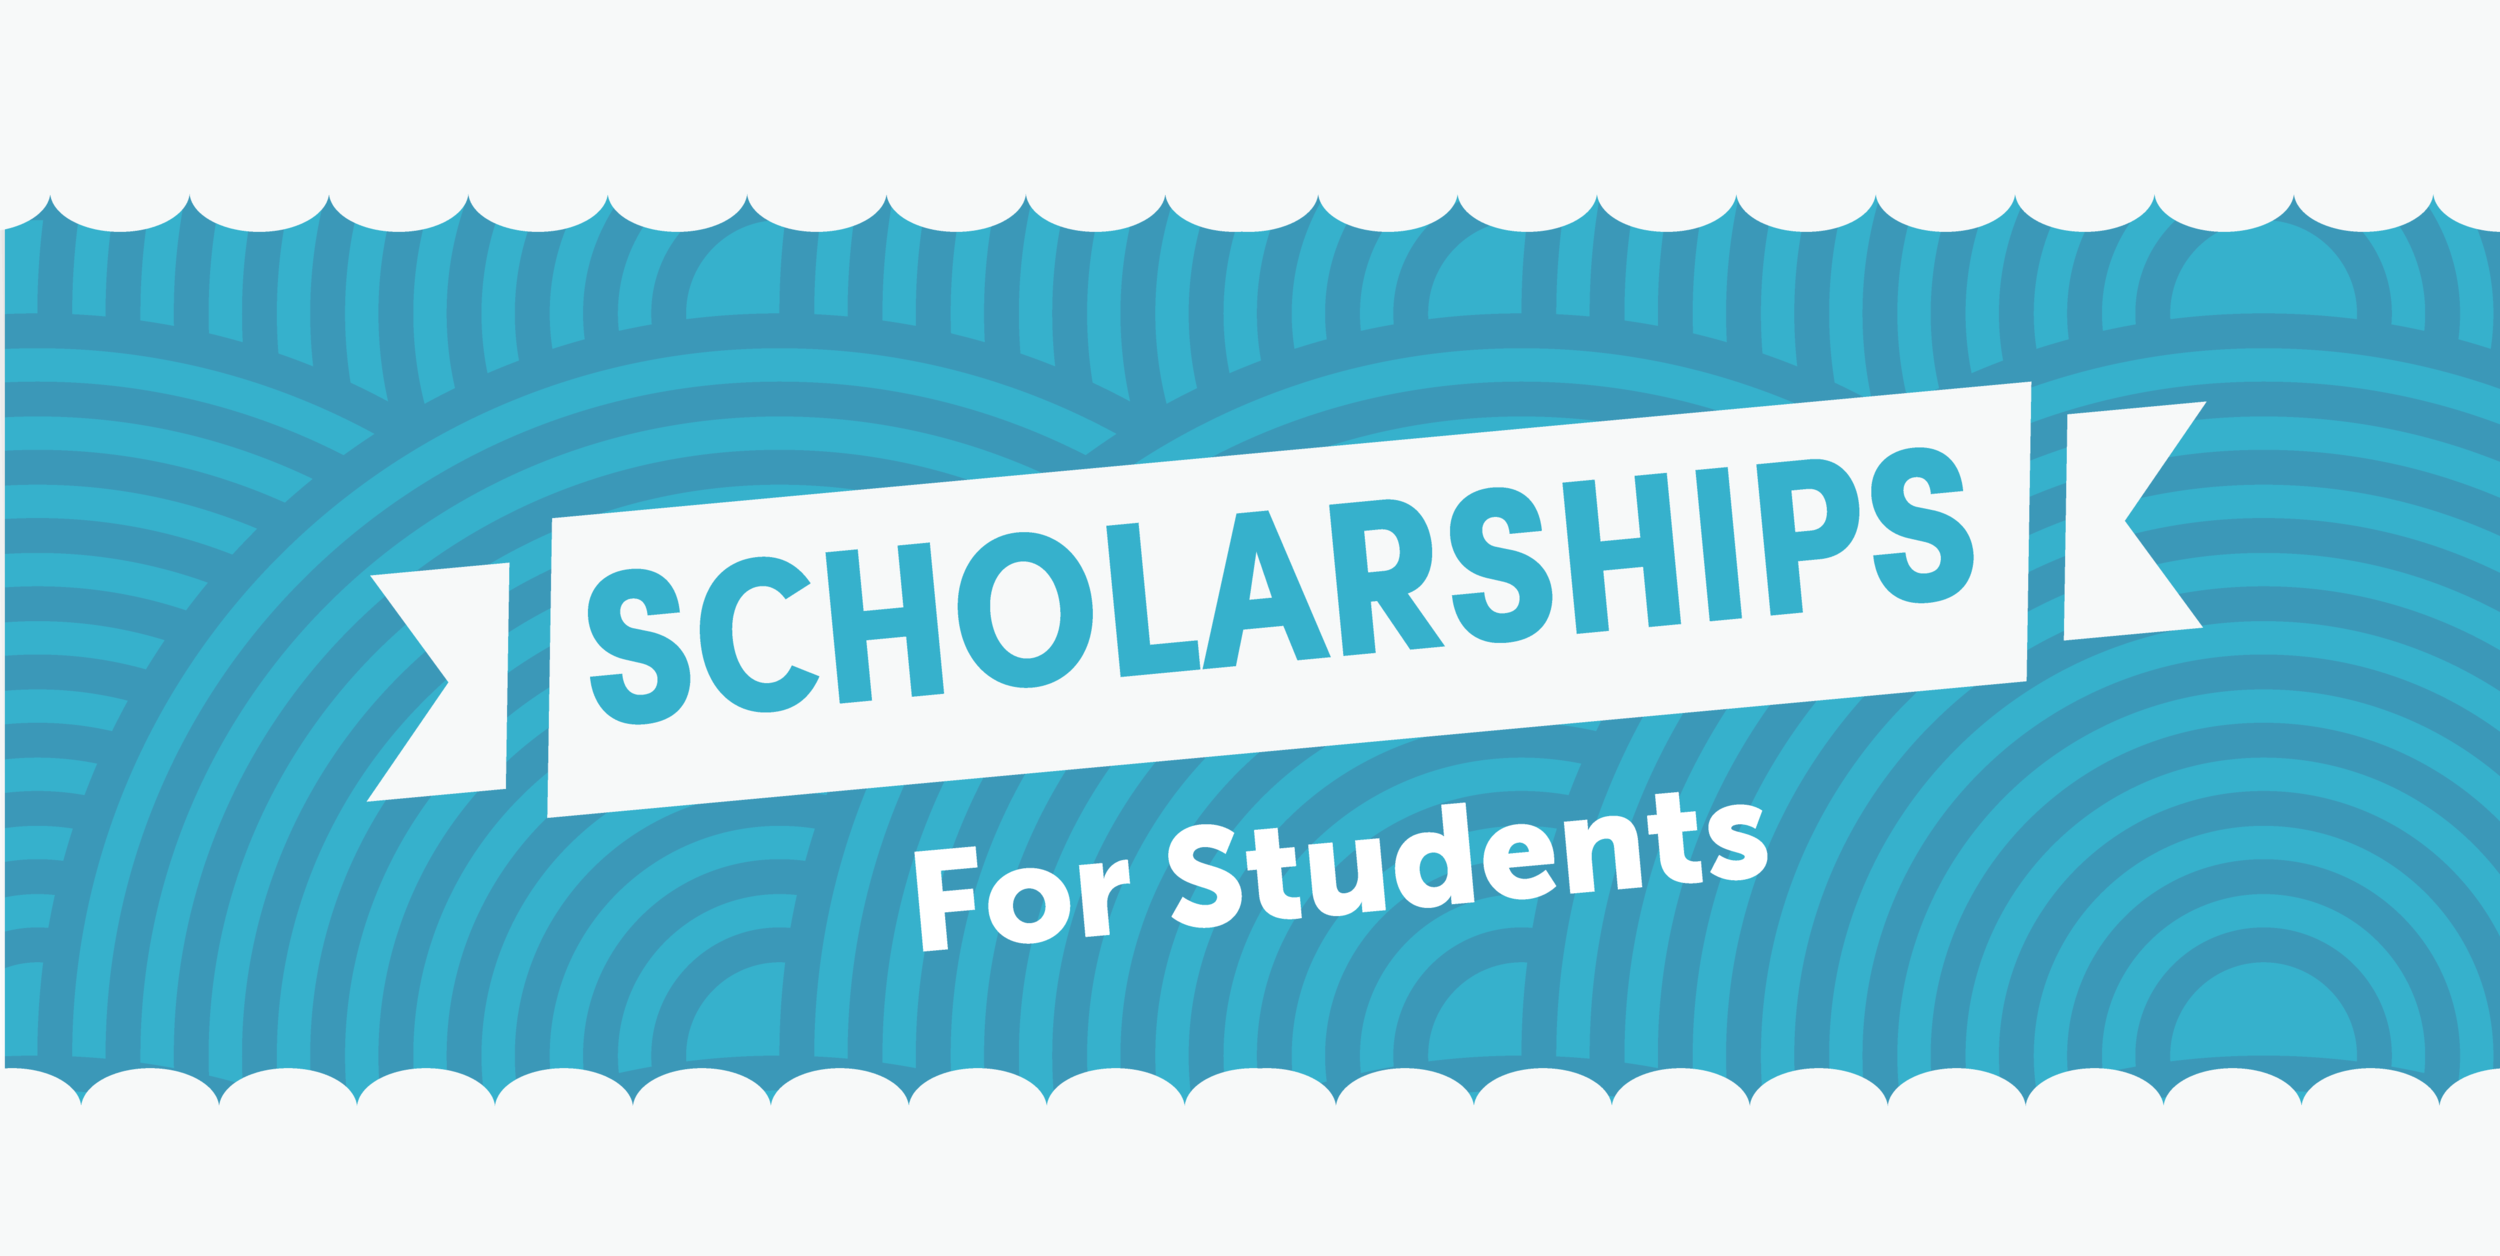 Carousel_Foundation_scholarships.png